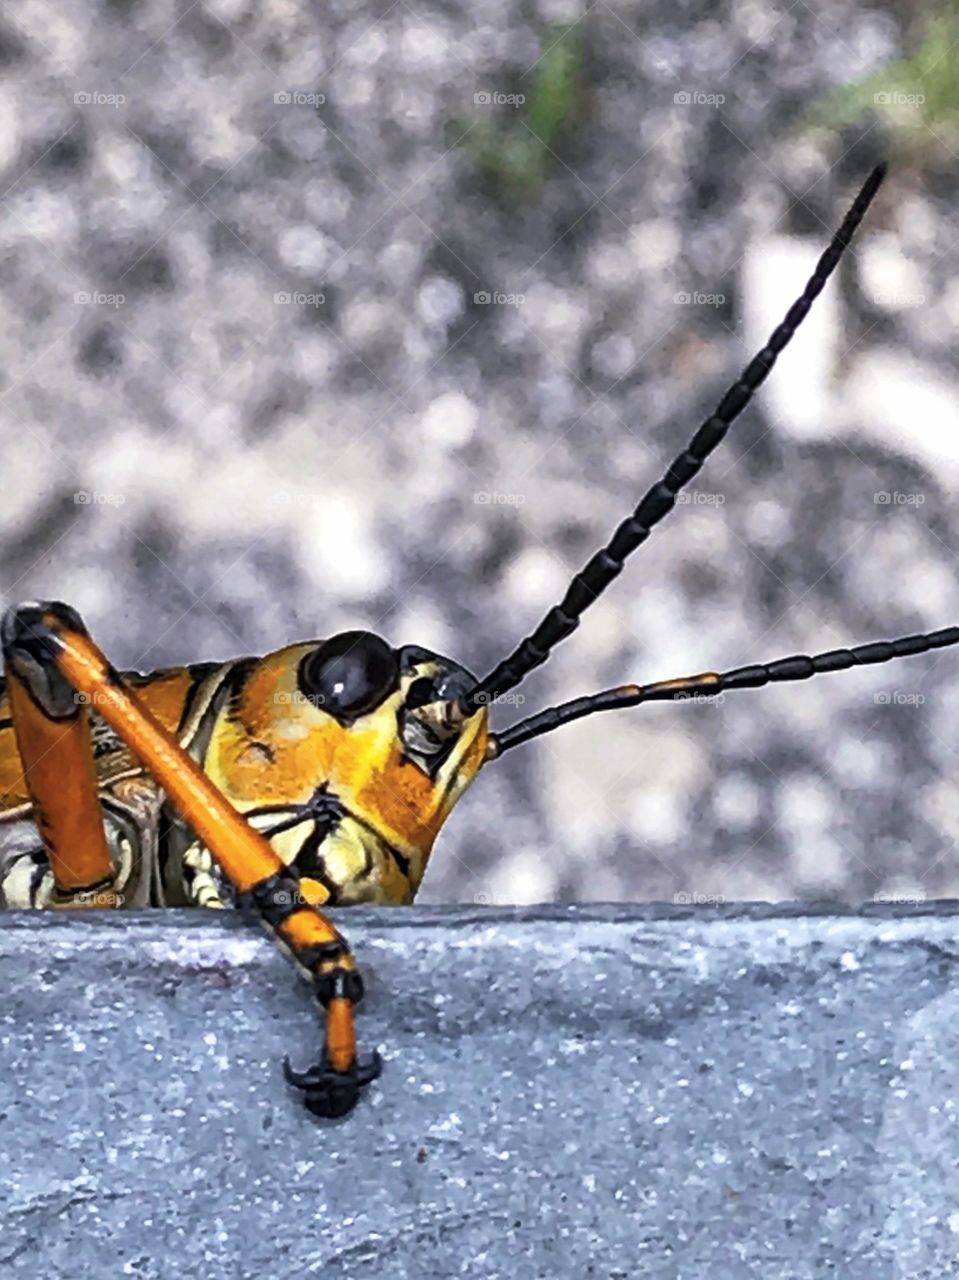 Hello there ... what’s up?  I’m a lubber grasshopper, just hanging ...